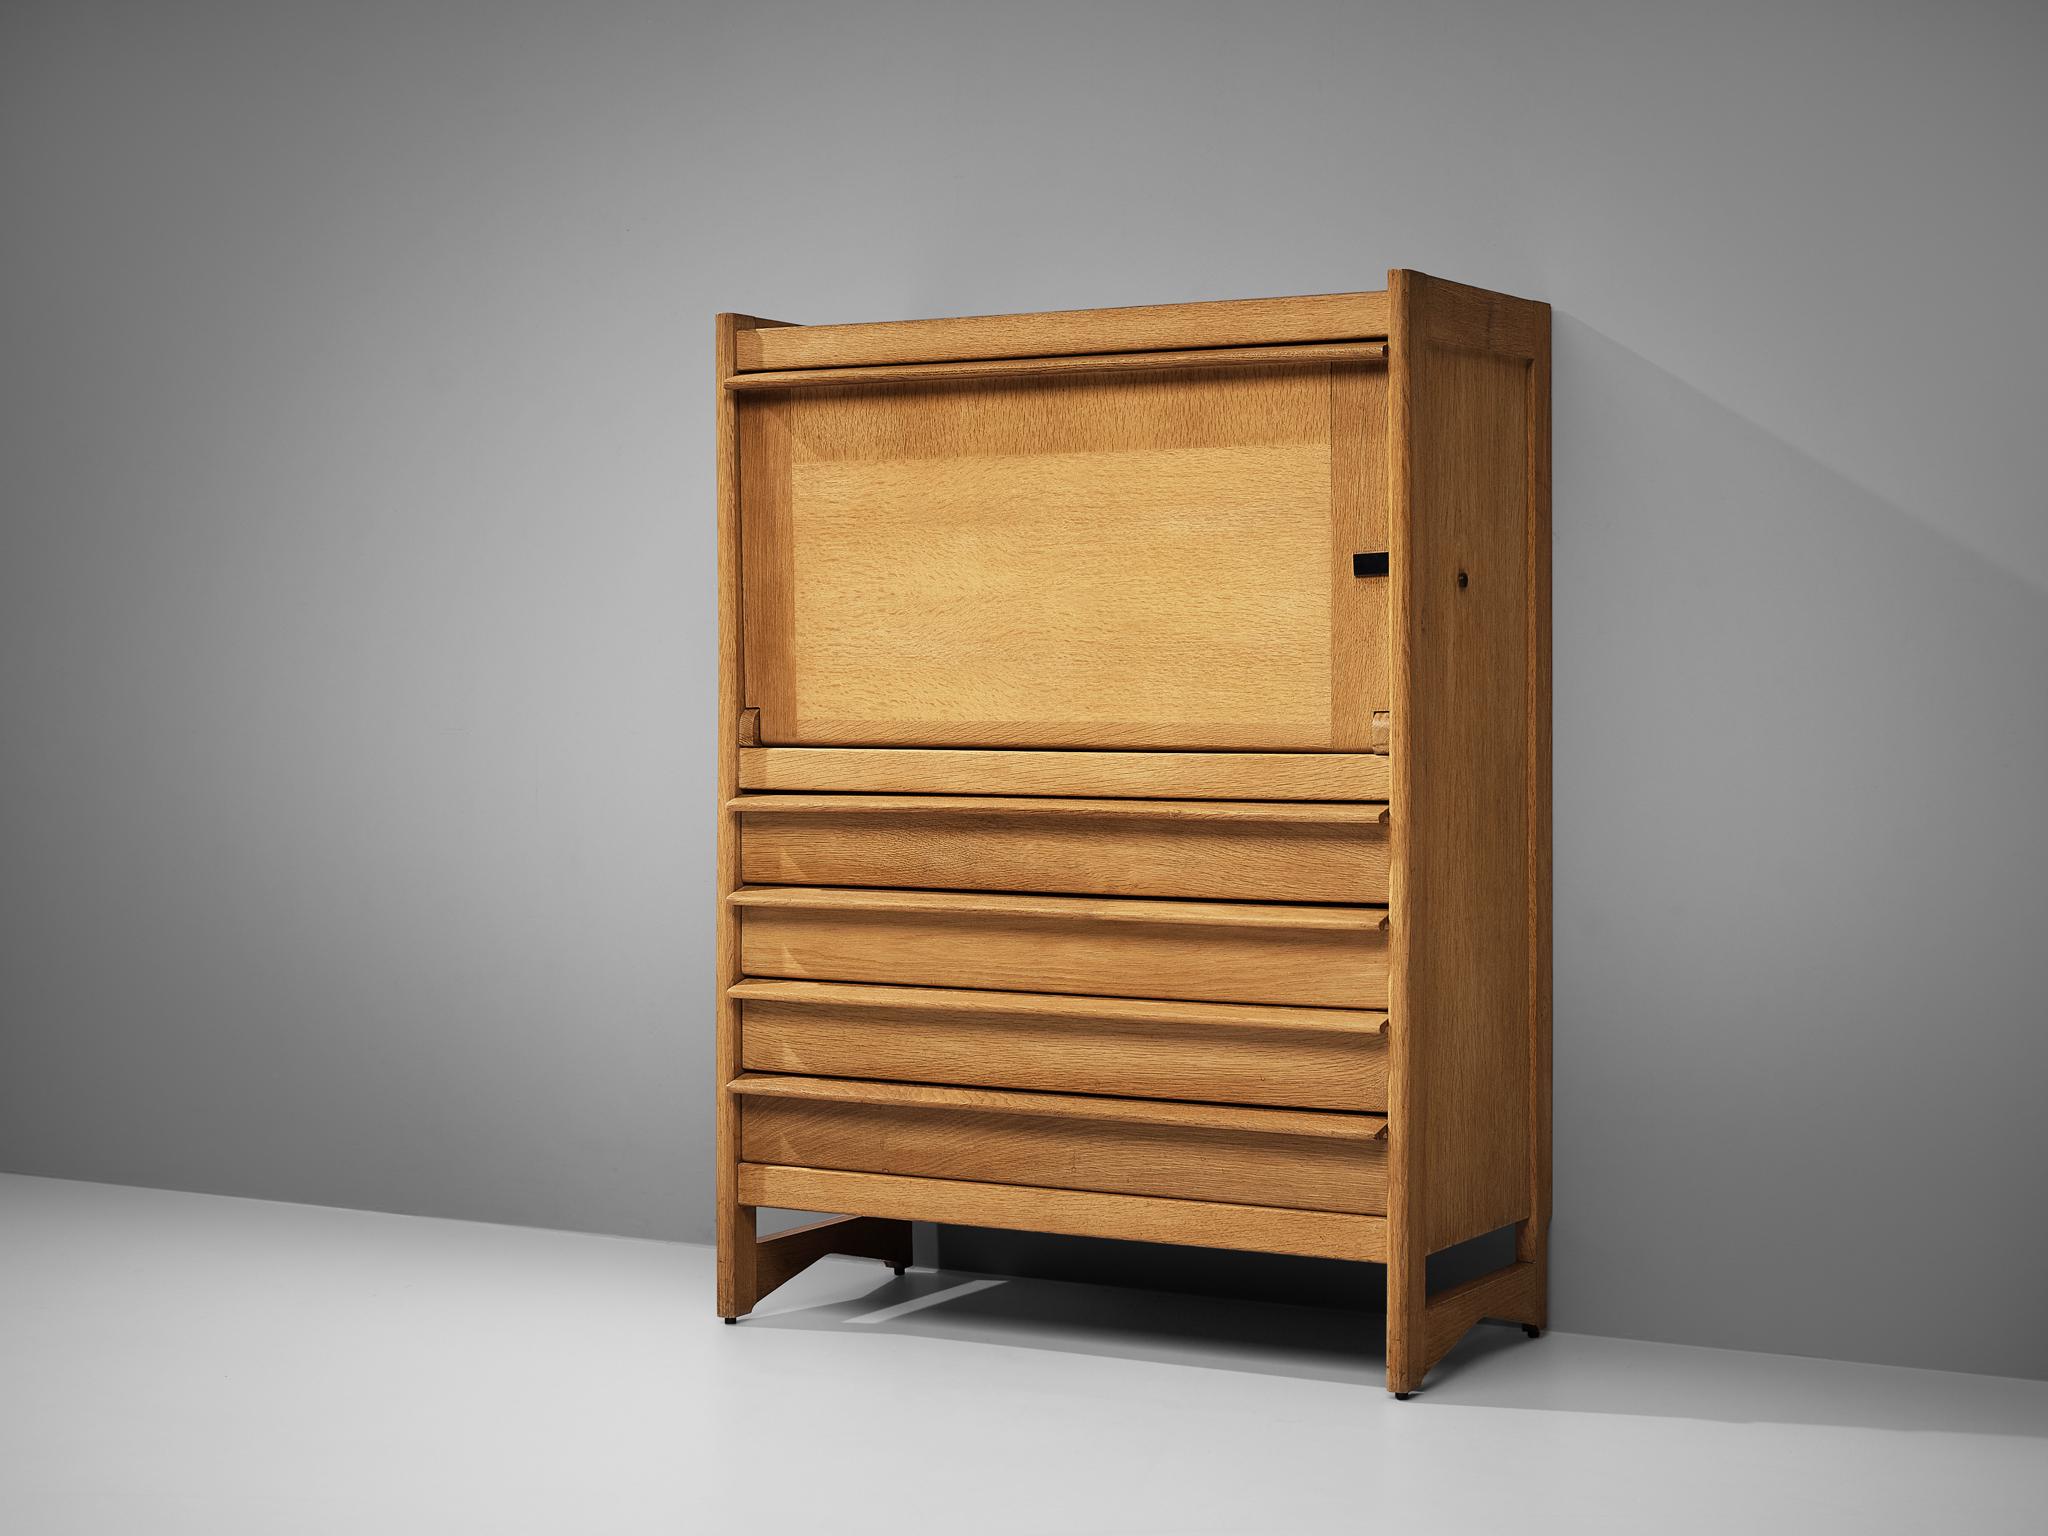 Guillerme et Chambron, highboard, oak, metal, France, 1960s

Guillerme et Chambron designed this beautiful yet functional highboard in the 1960s. Four drawers and a hinge door opening downwards offering structured storage space provide the user with